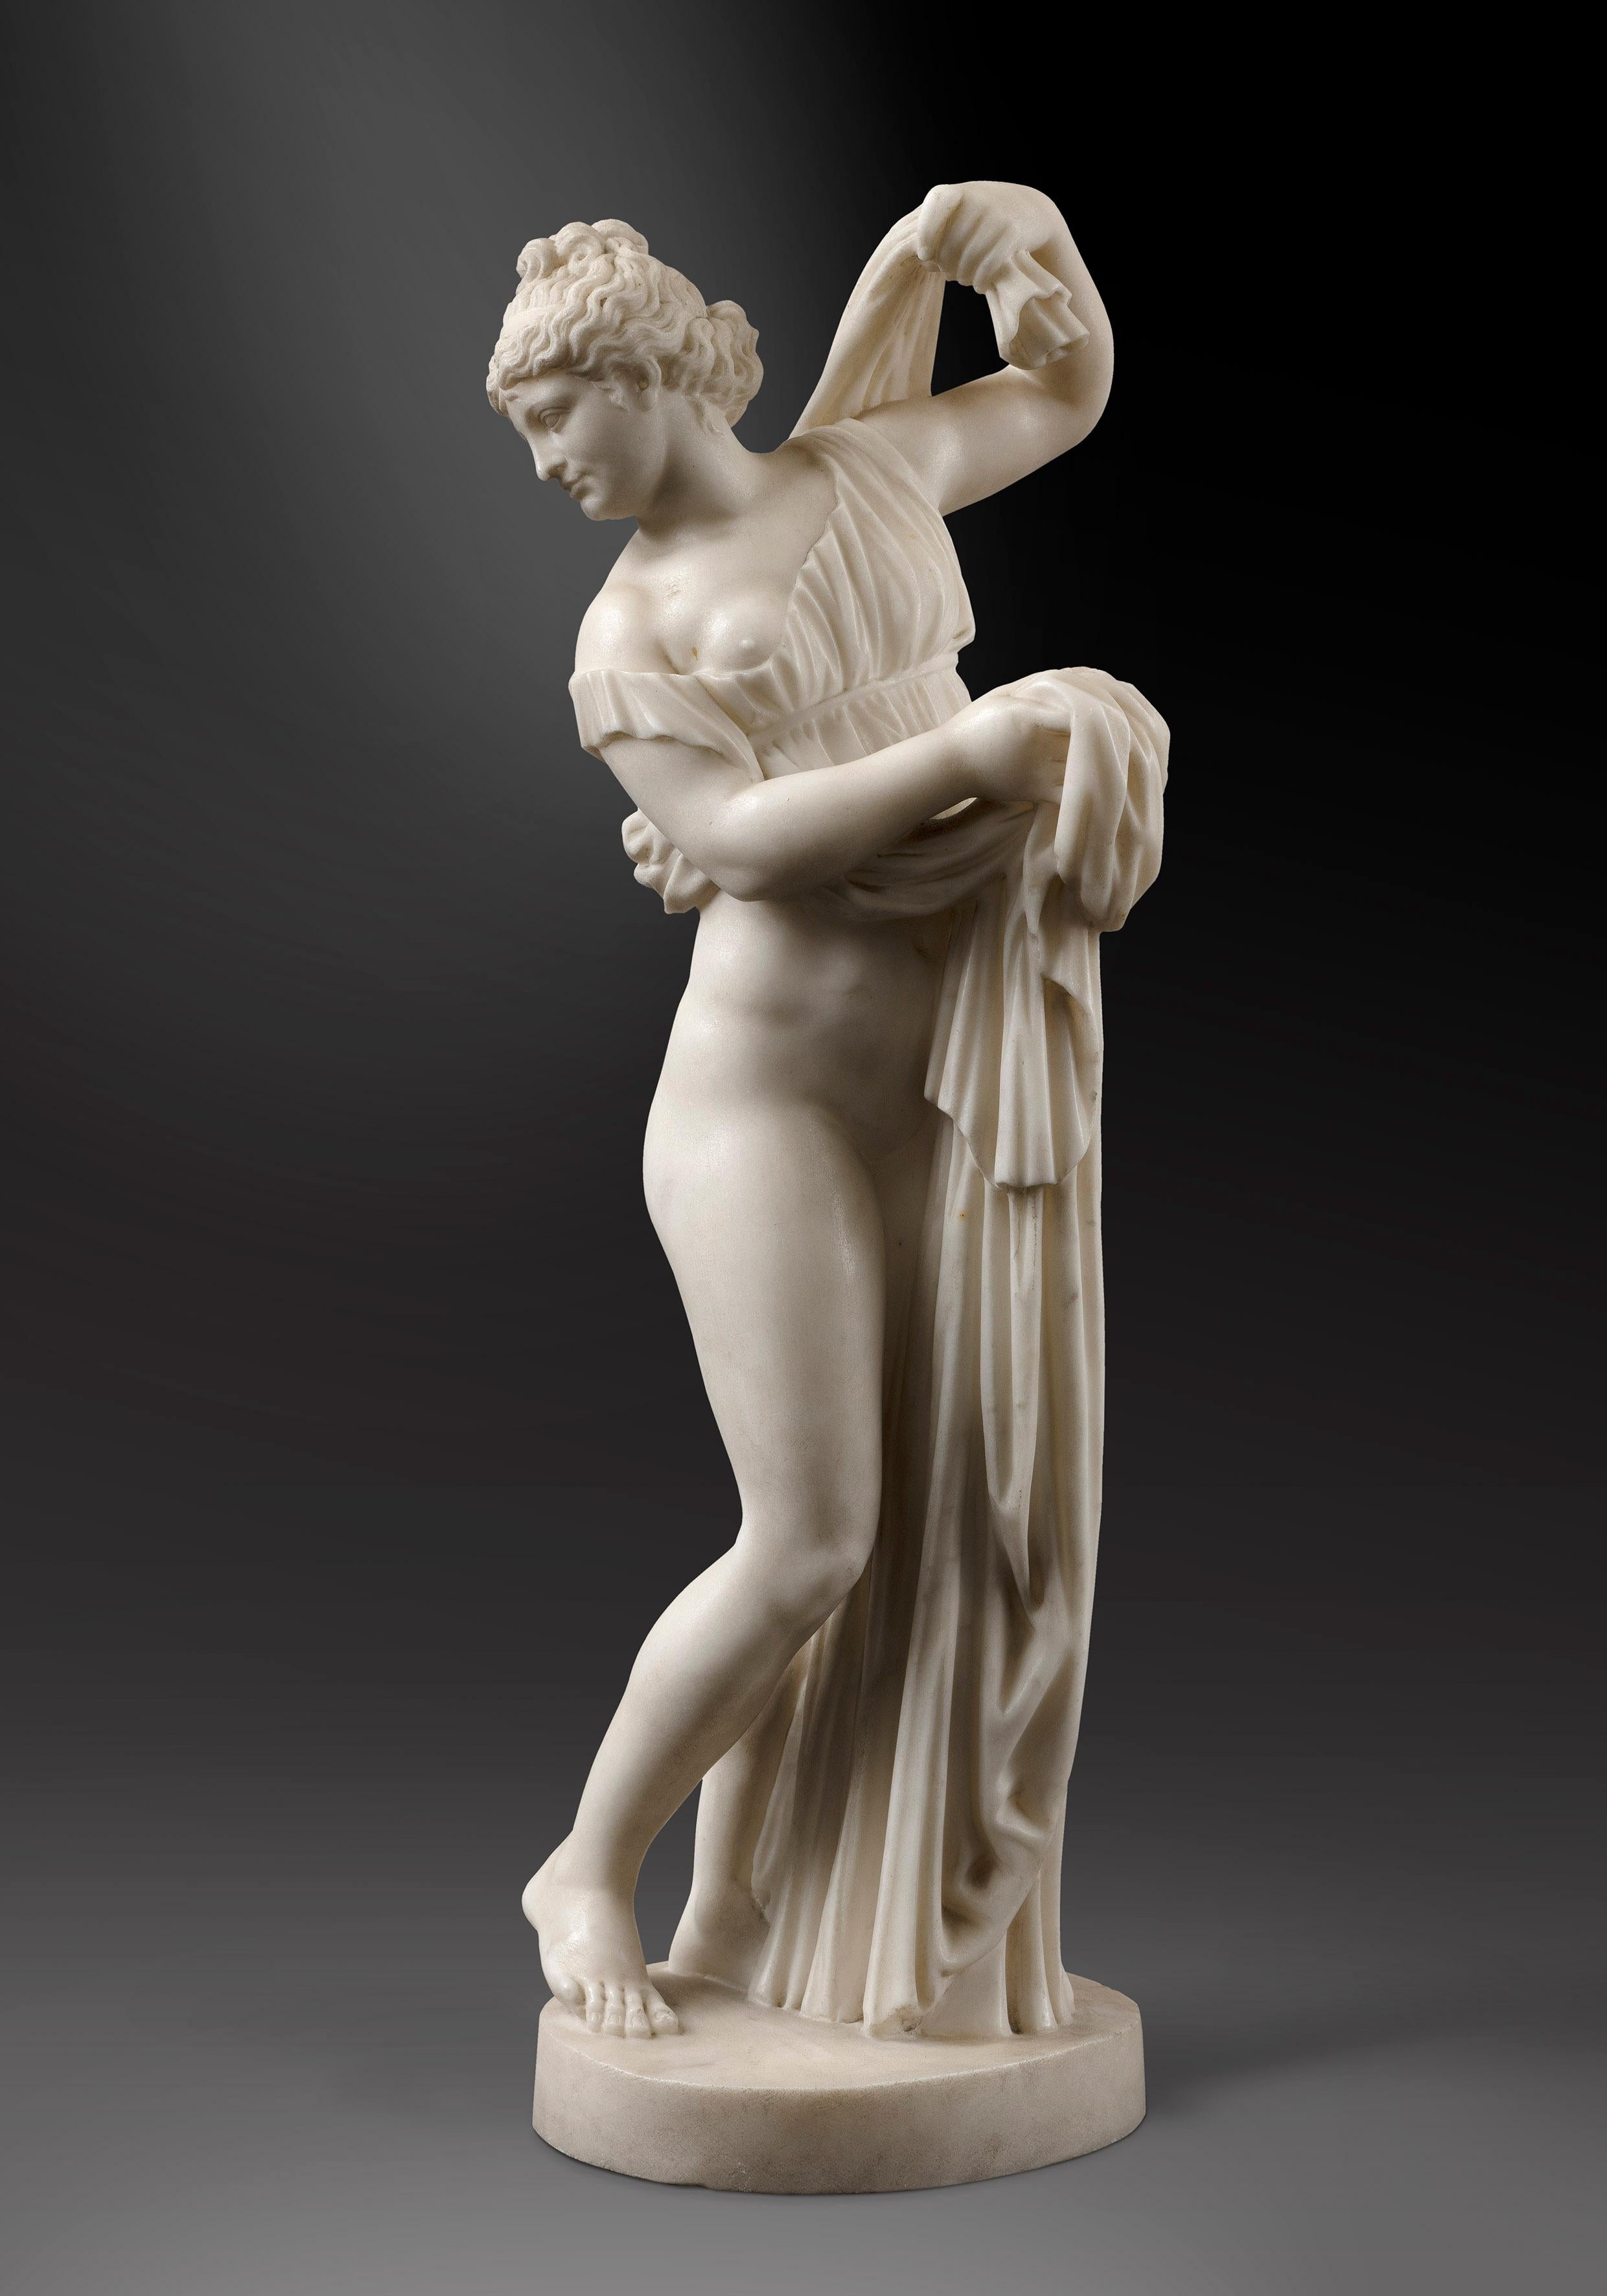 Callipygian Venus

19th Century
Italian (Naples or Rome)
White marble 
After the Antique: Naples Archaeological Museum (IT)
Roman version of a Hellenistic 3rd Century B.C. model



Height: 62 cm
Width: 22 cm
H 24 1/2 x W 8 2/3 inch 

The Callipygian